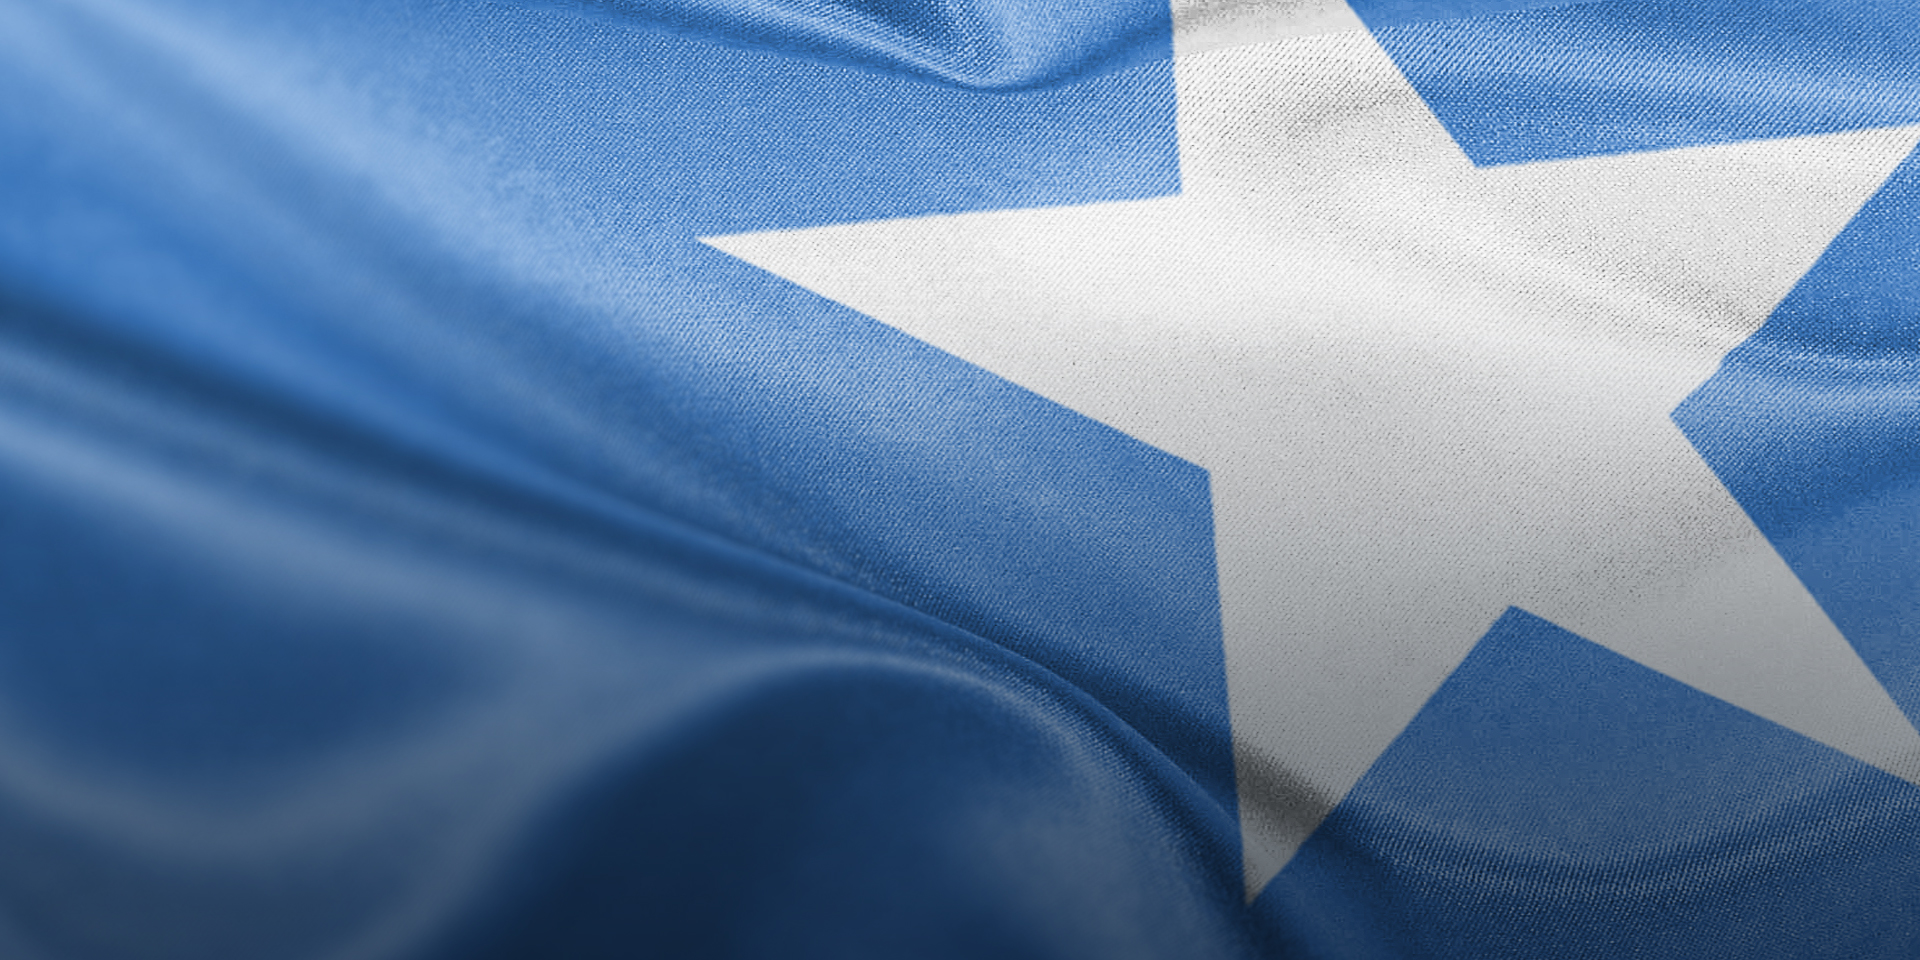 A close-up image of the flag of Somalia: a light blue background with a large white star in the center.